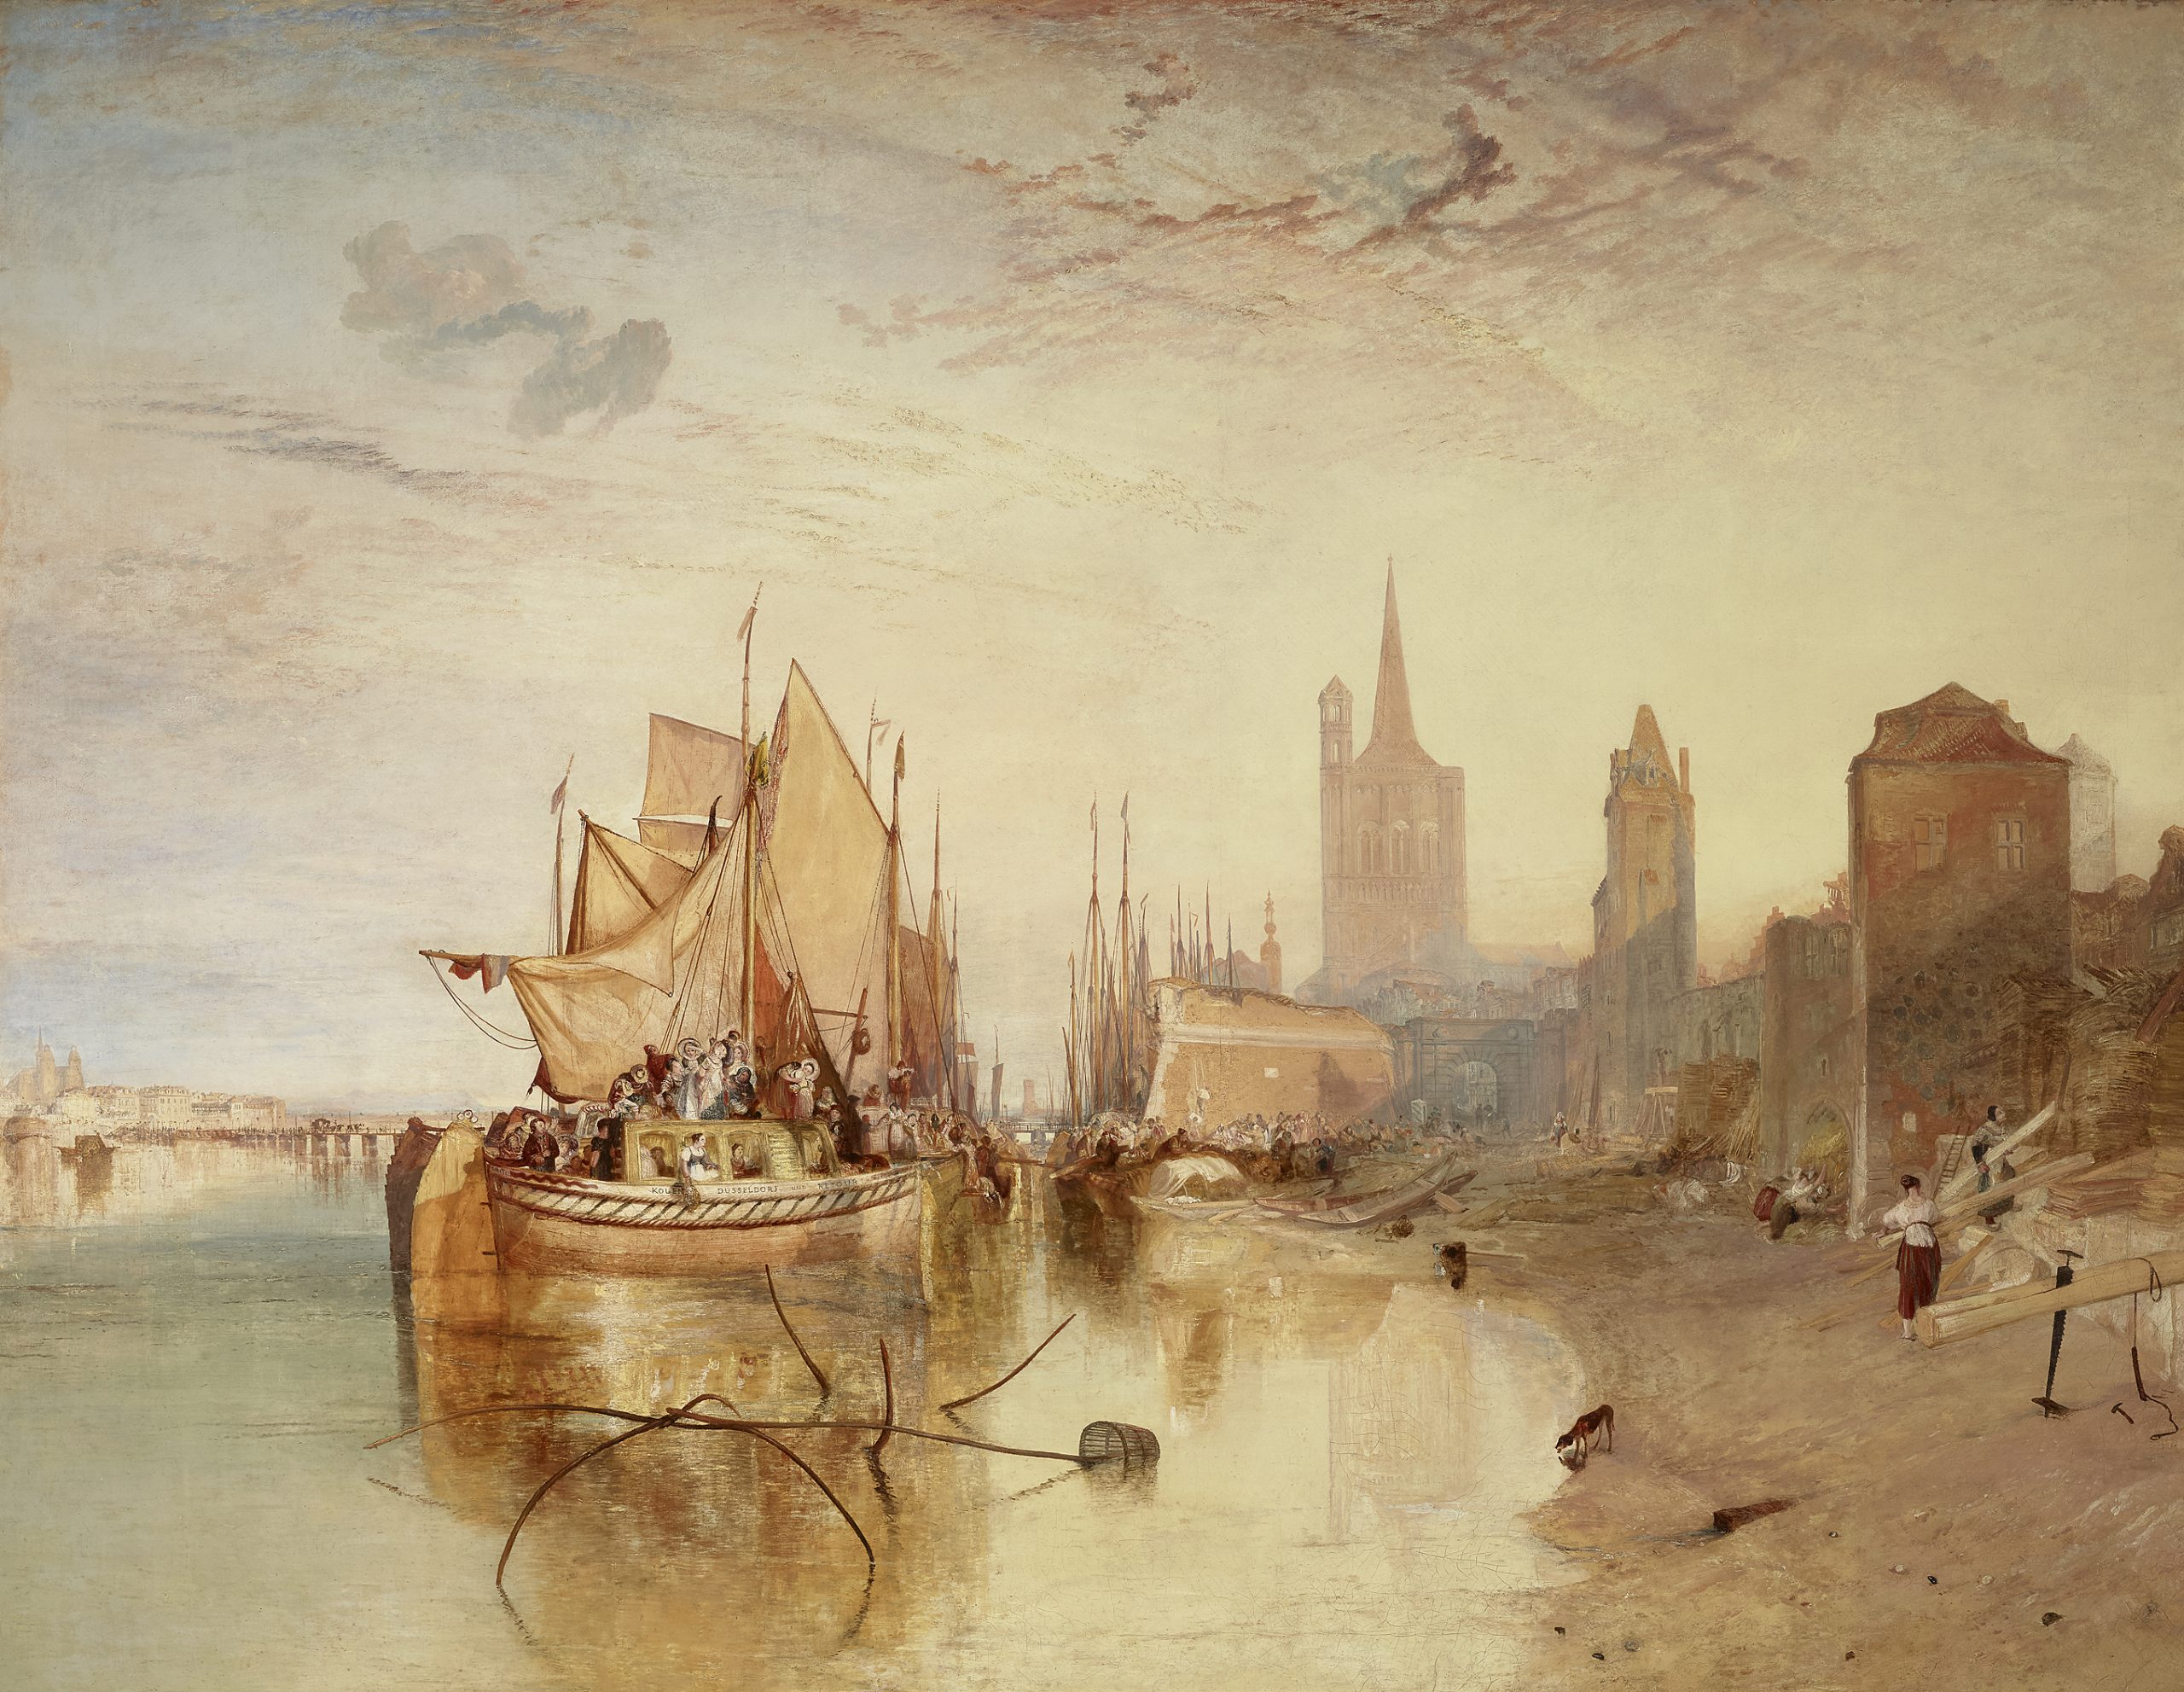 Joseph Mallord William Turner, Cologne, the Arrival of a Packet-Boat: Evening, 1826, Oil on canvas, 168.6 x 224.2 cm, The Frick Collection, New York, © The Frick Collection, New York - photo Michael Bodycomb